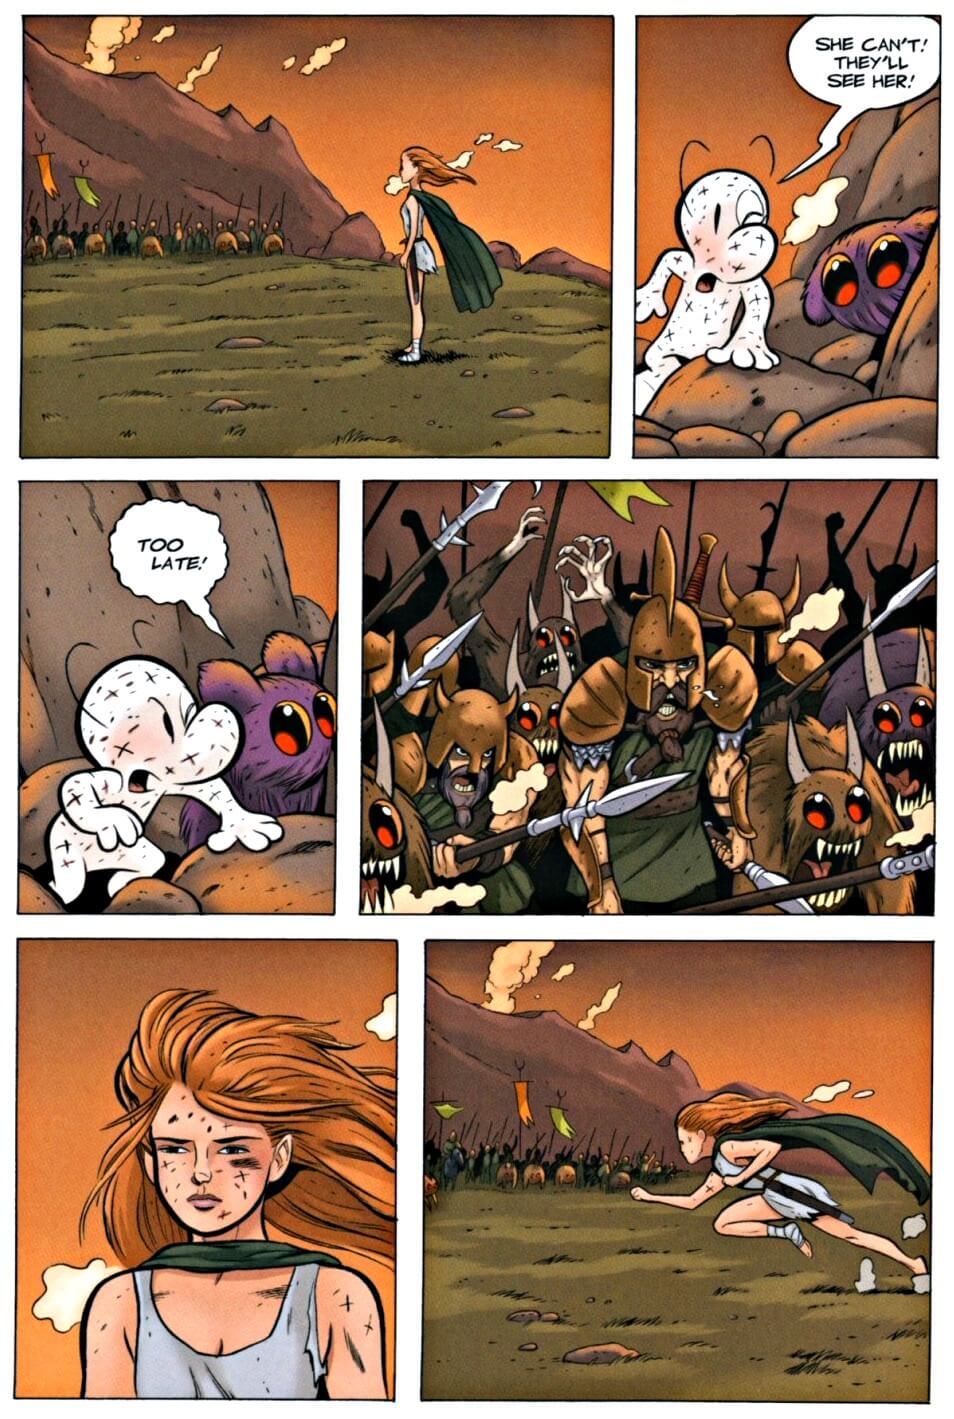 page 109 chapter 4 of bone 9 crown of horns graphic novel